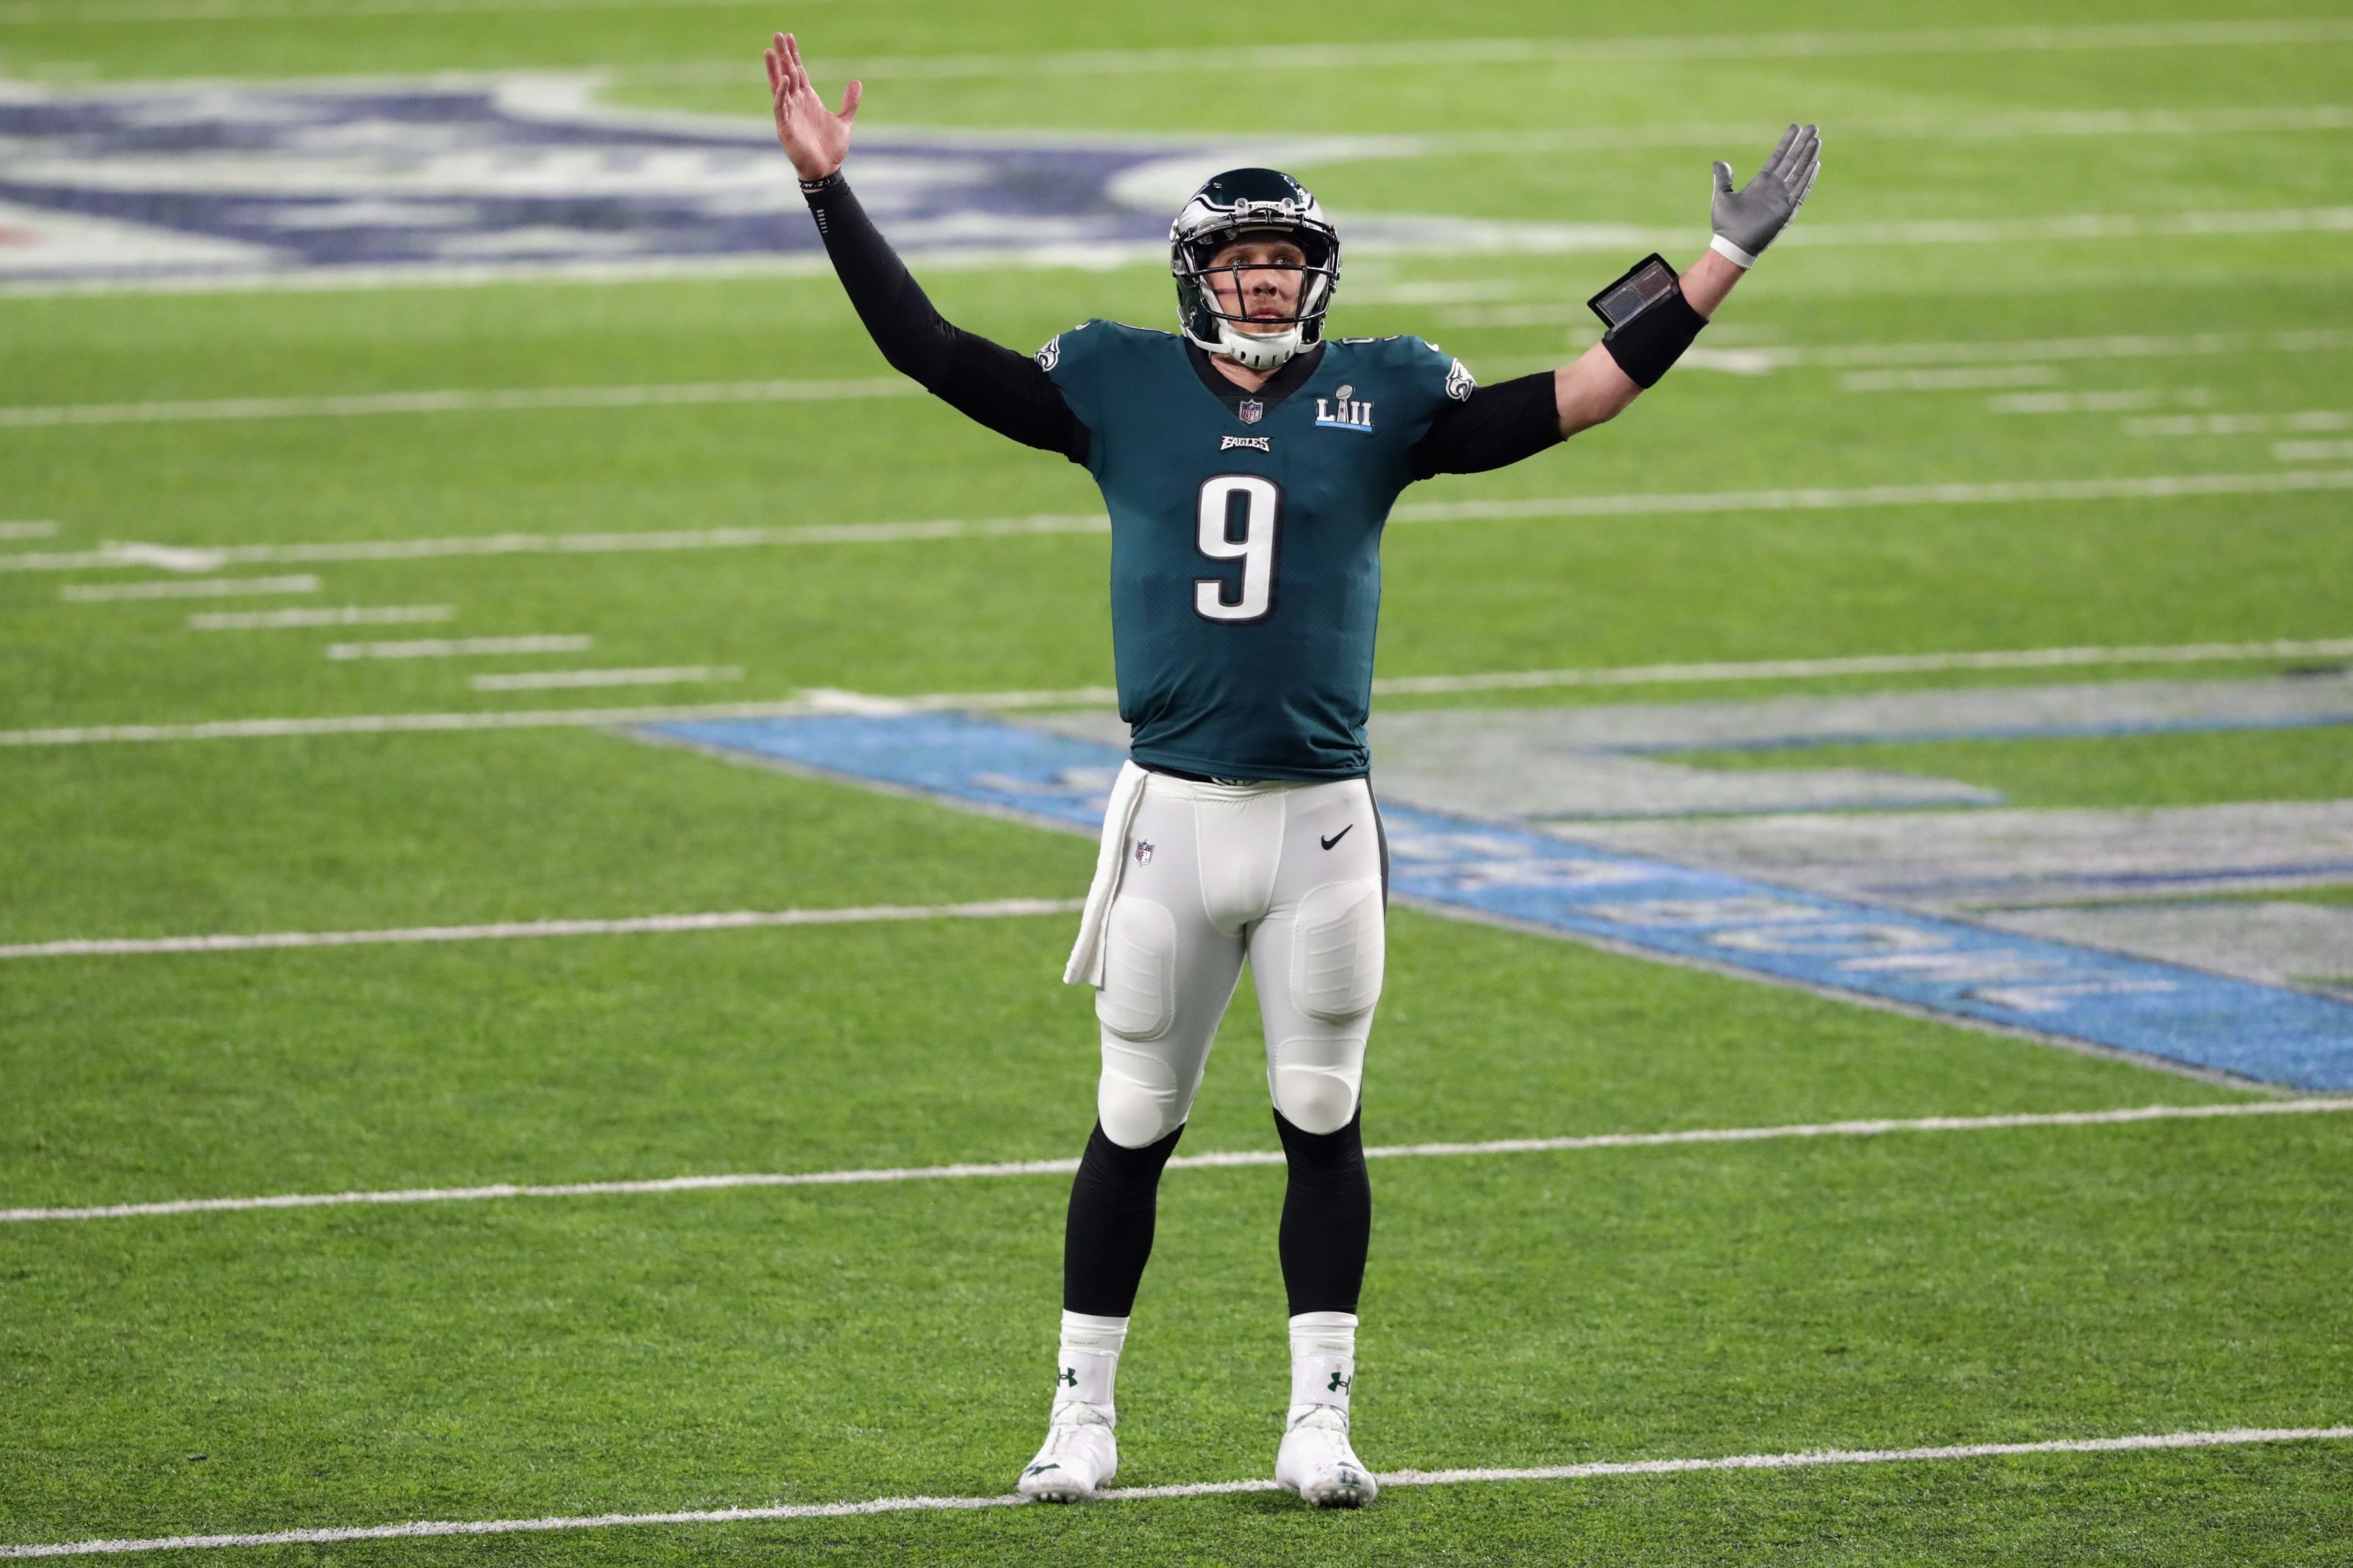 Eagles QB Nick Foles is now forever enshrined at his Alma Mater